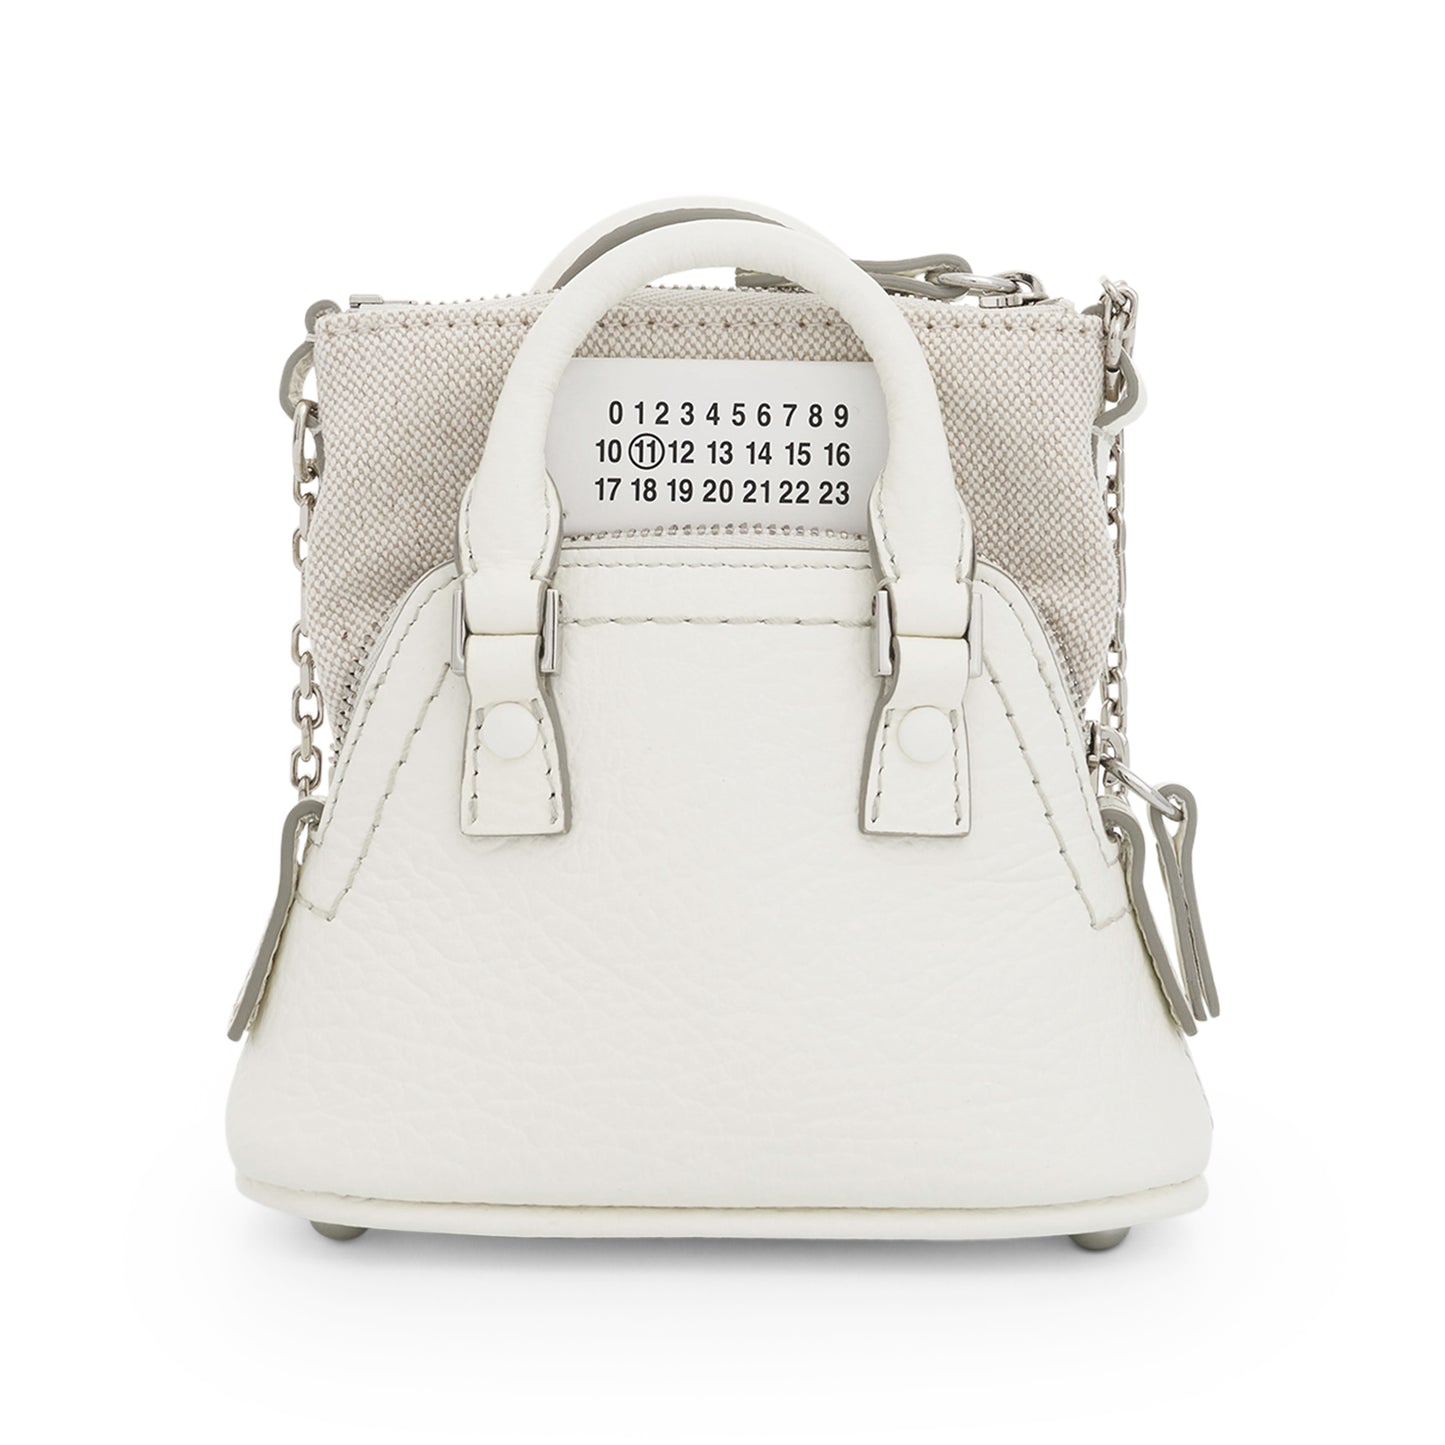 Baby 5AC Leather Bag in White